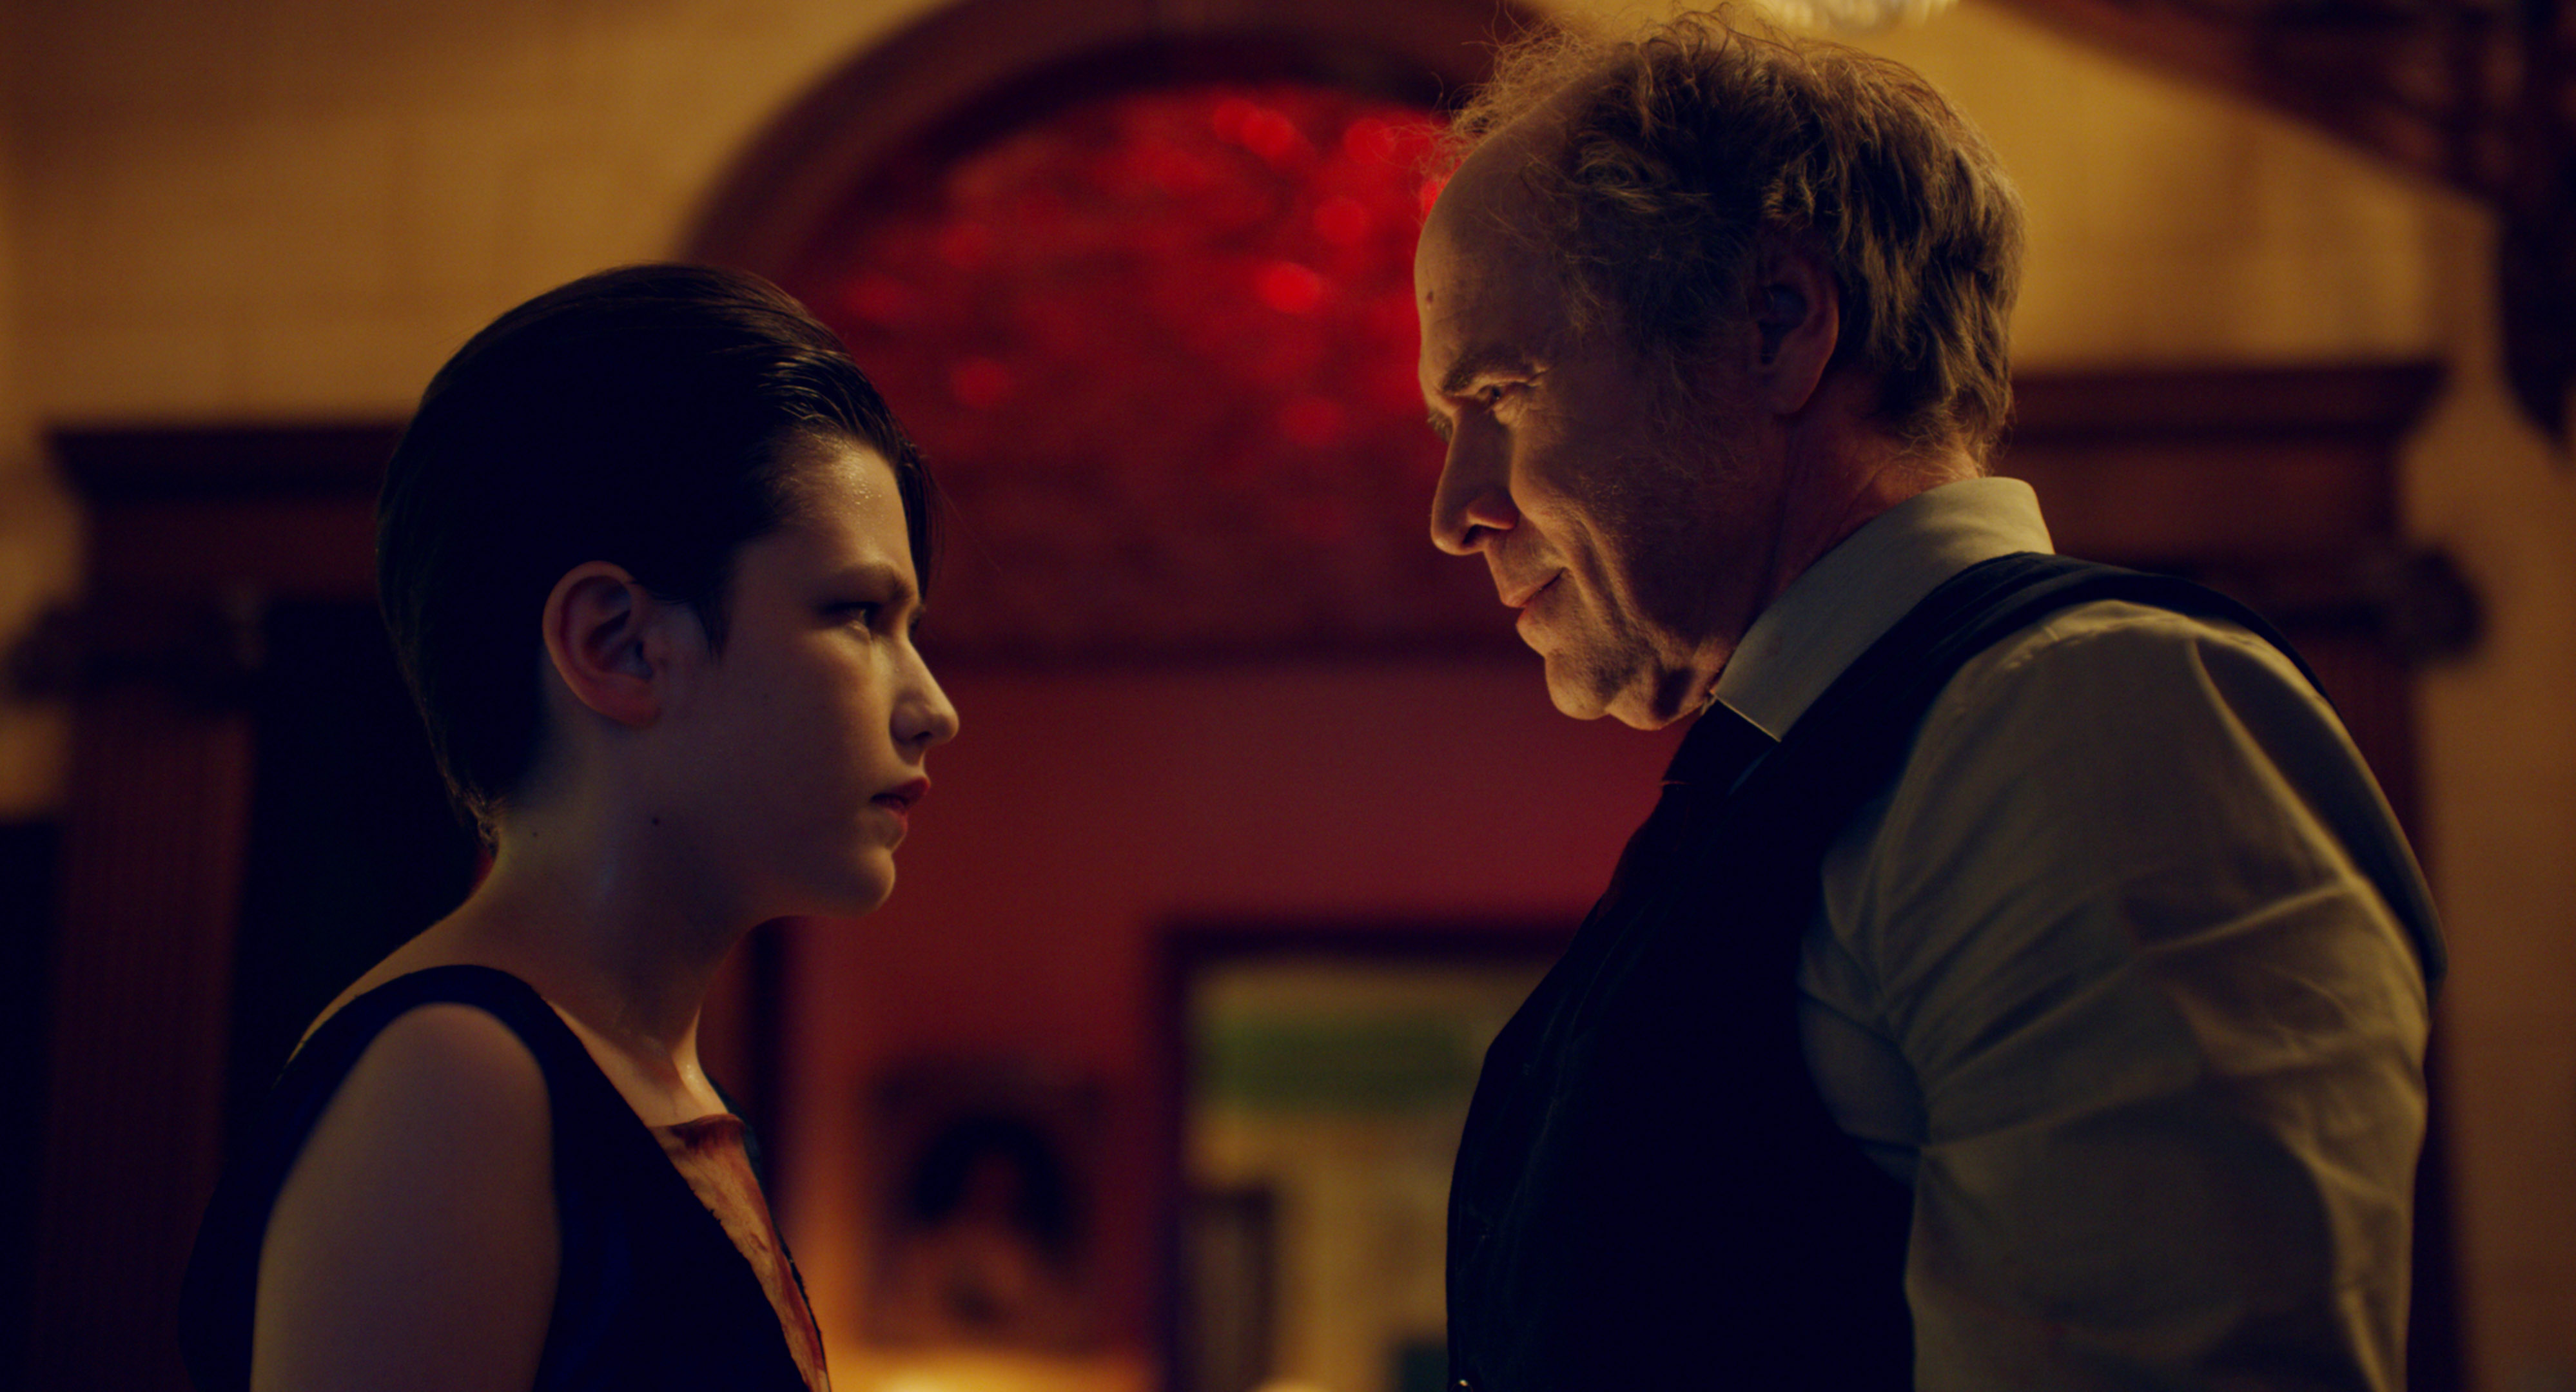 Jacob and Dr. Sherman face each other in a red-lit room.